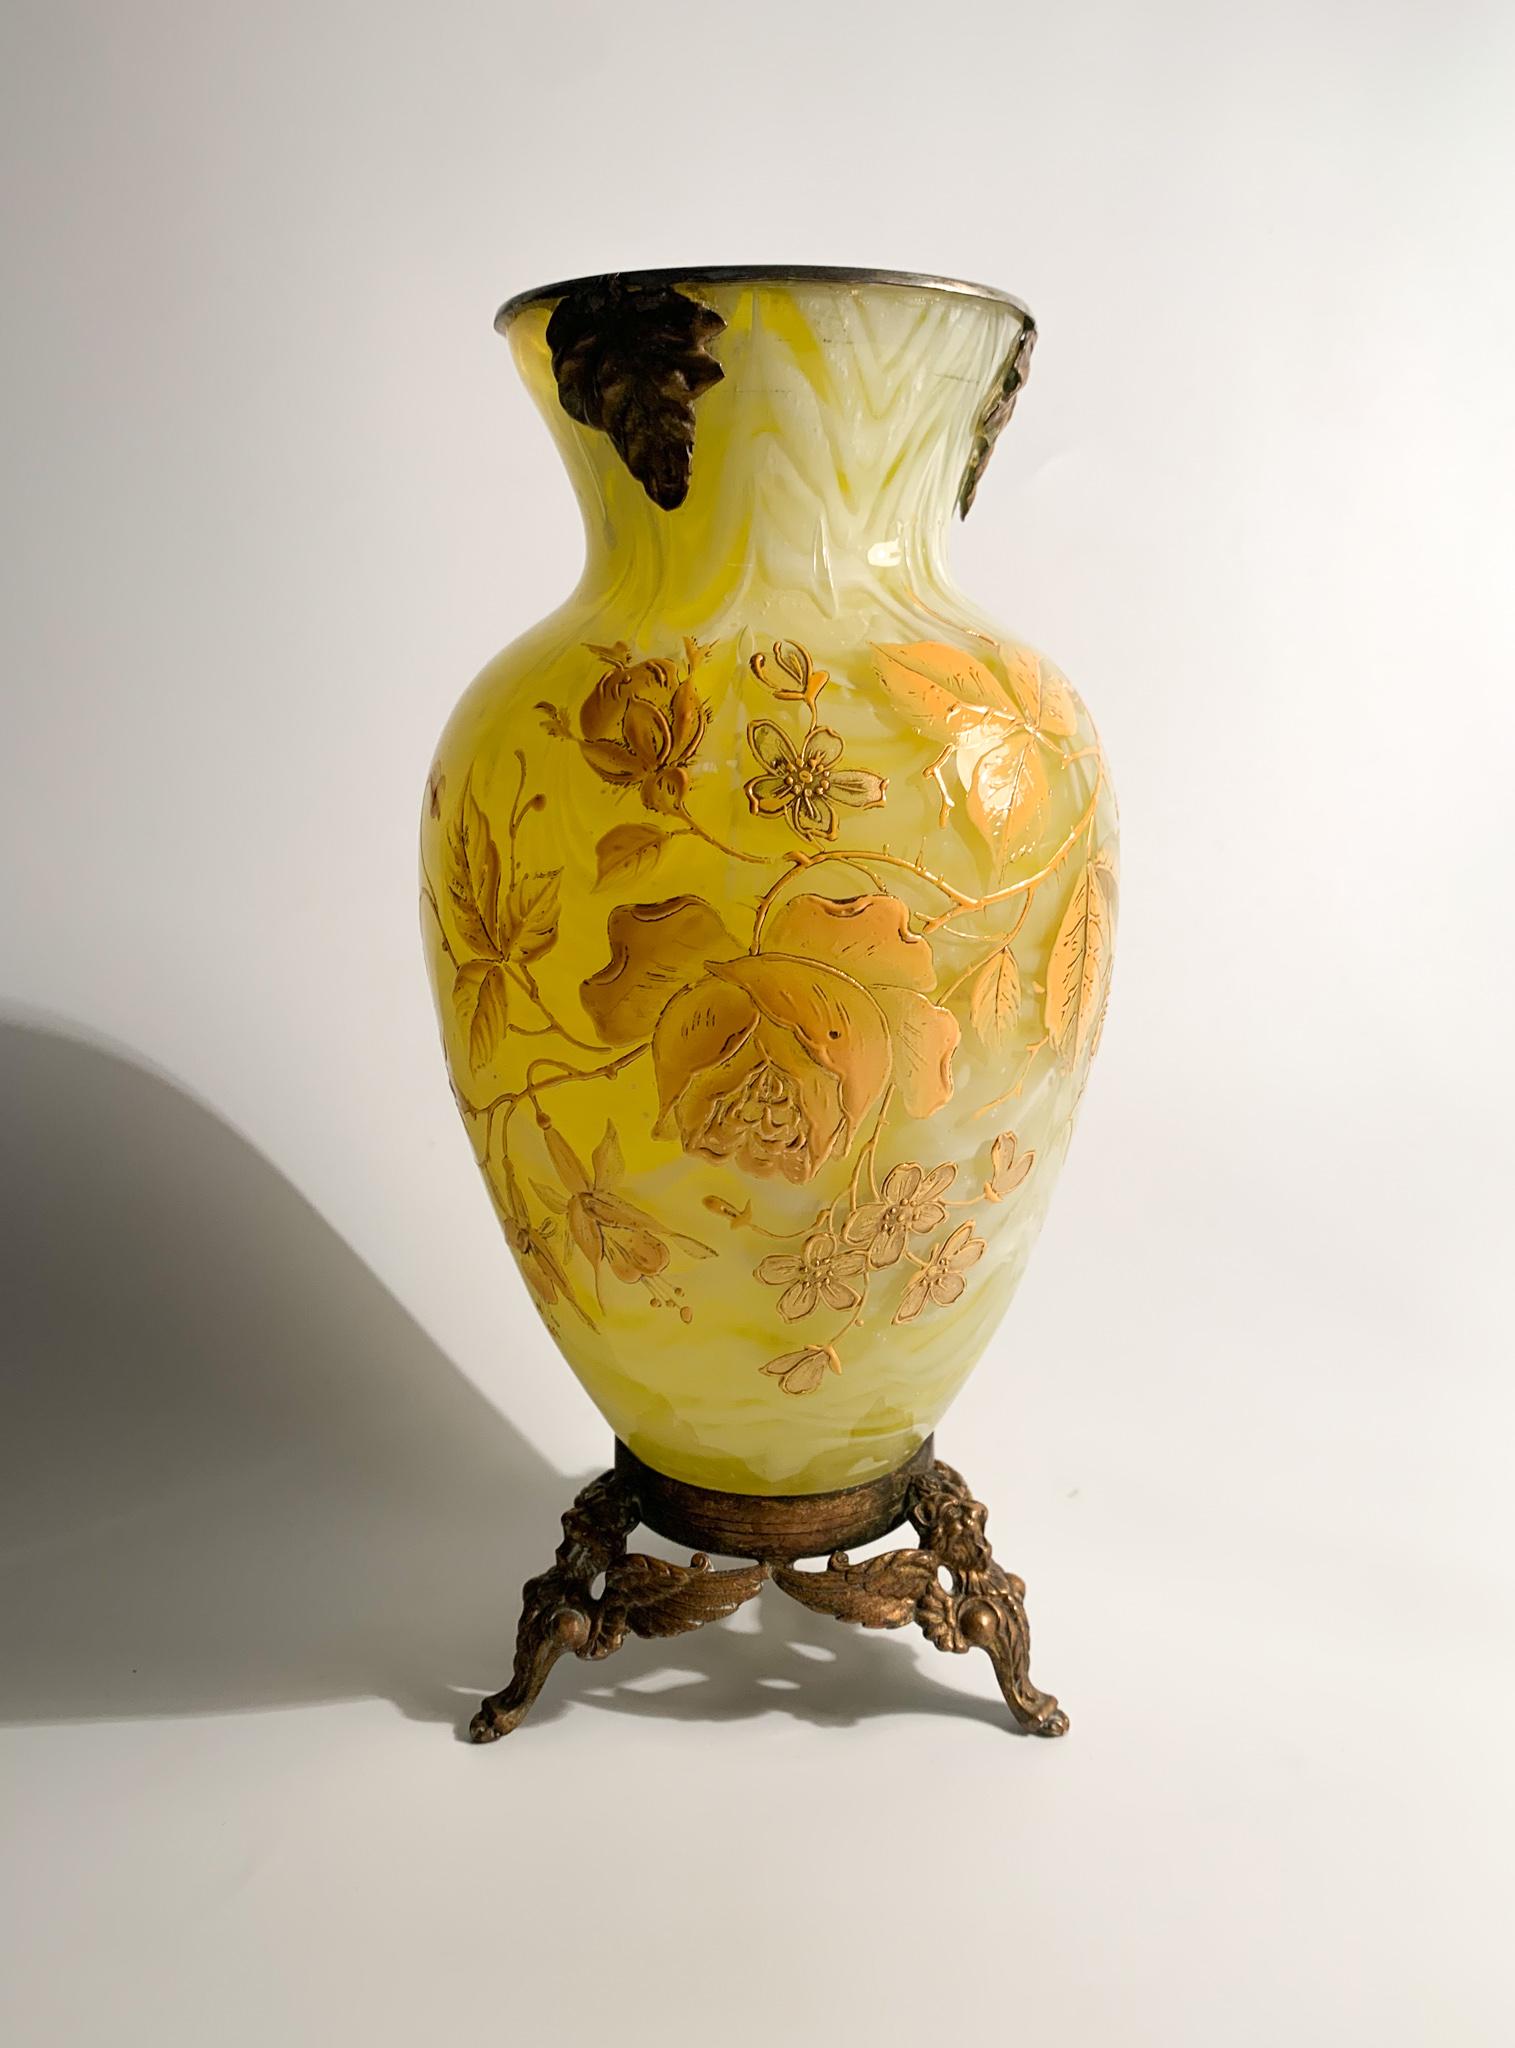 Liberty vase in fluorescent yellow and bronze Murano glass, with enamelled flower decorations. Made in the early 20th century

Measures: Ø cm 10 h cm 21.